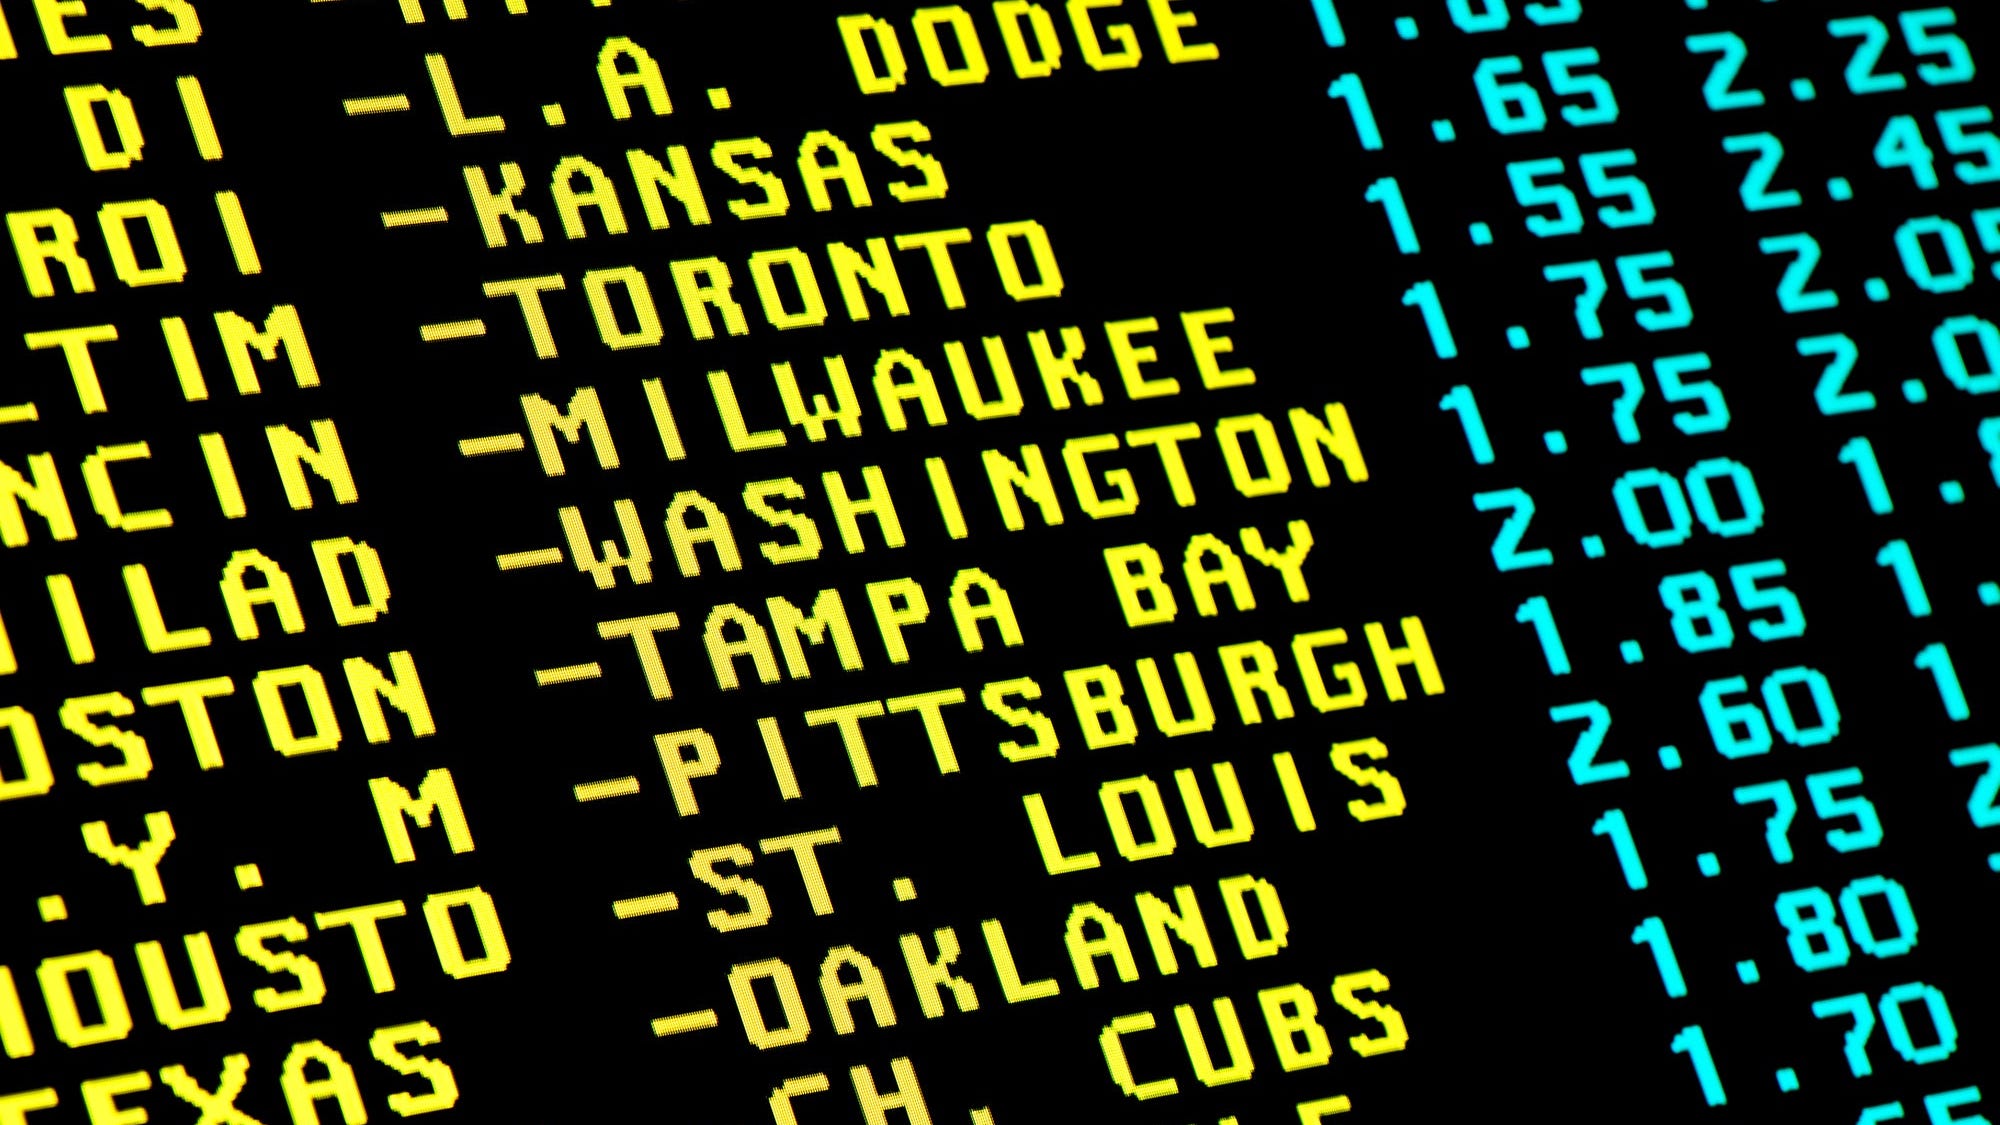 Sports betting is coming to Maryland. What you need to know.